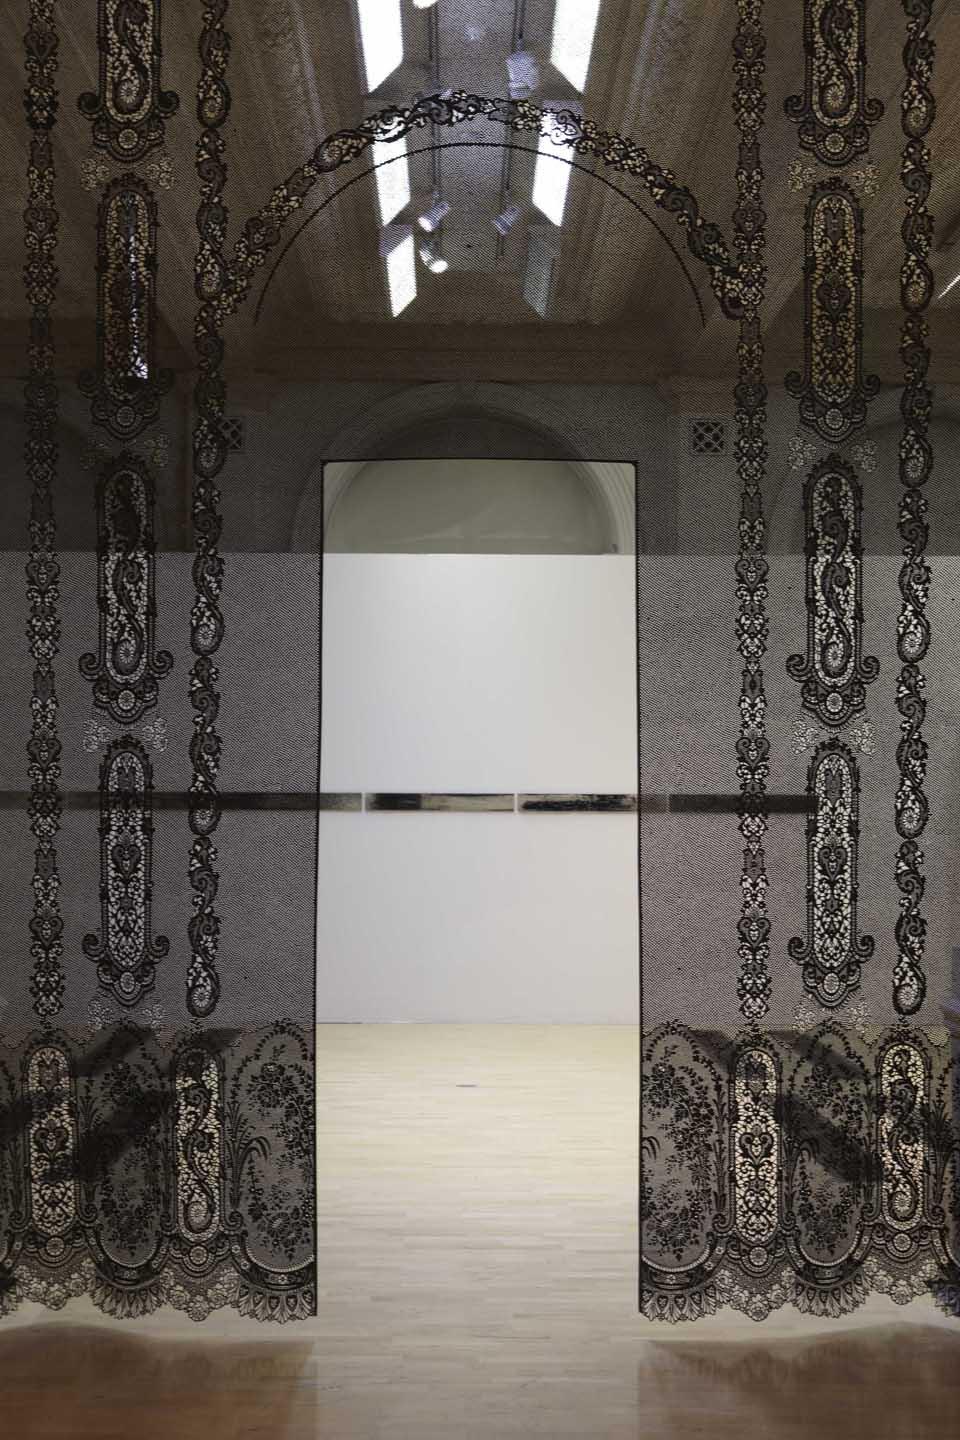 Piper Shepard (USA) has taken a piece of historic point de gaze lace from the BMAG
Collection as the starting point for a black hand-cut vellum piece that will be
installed between two internal gallery columns and opposite Bascoul’s large
white Moucharabieh screen